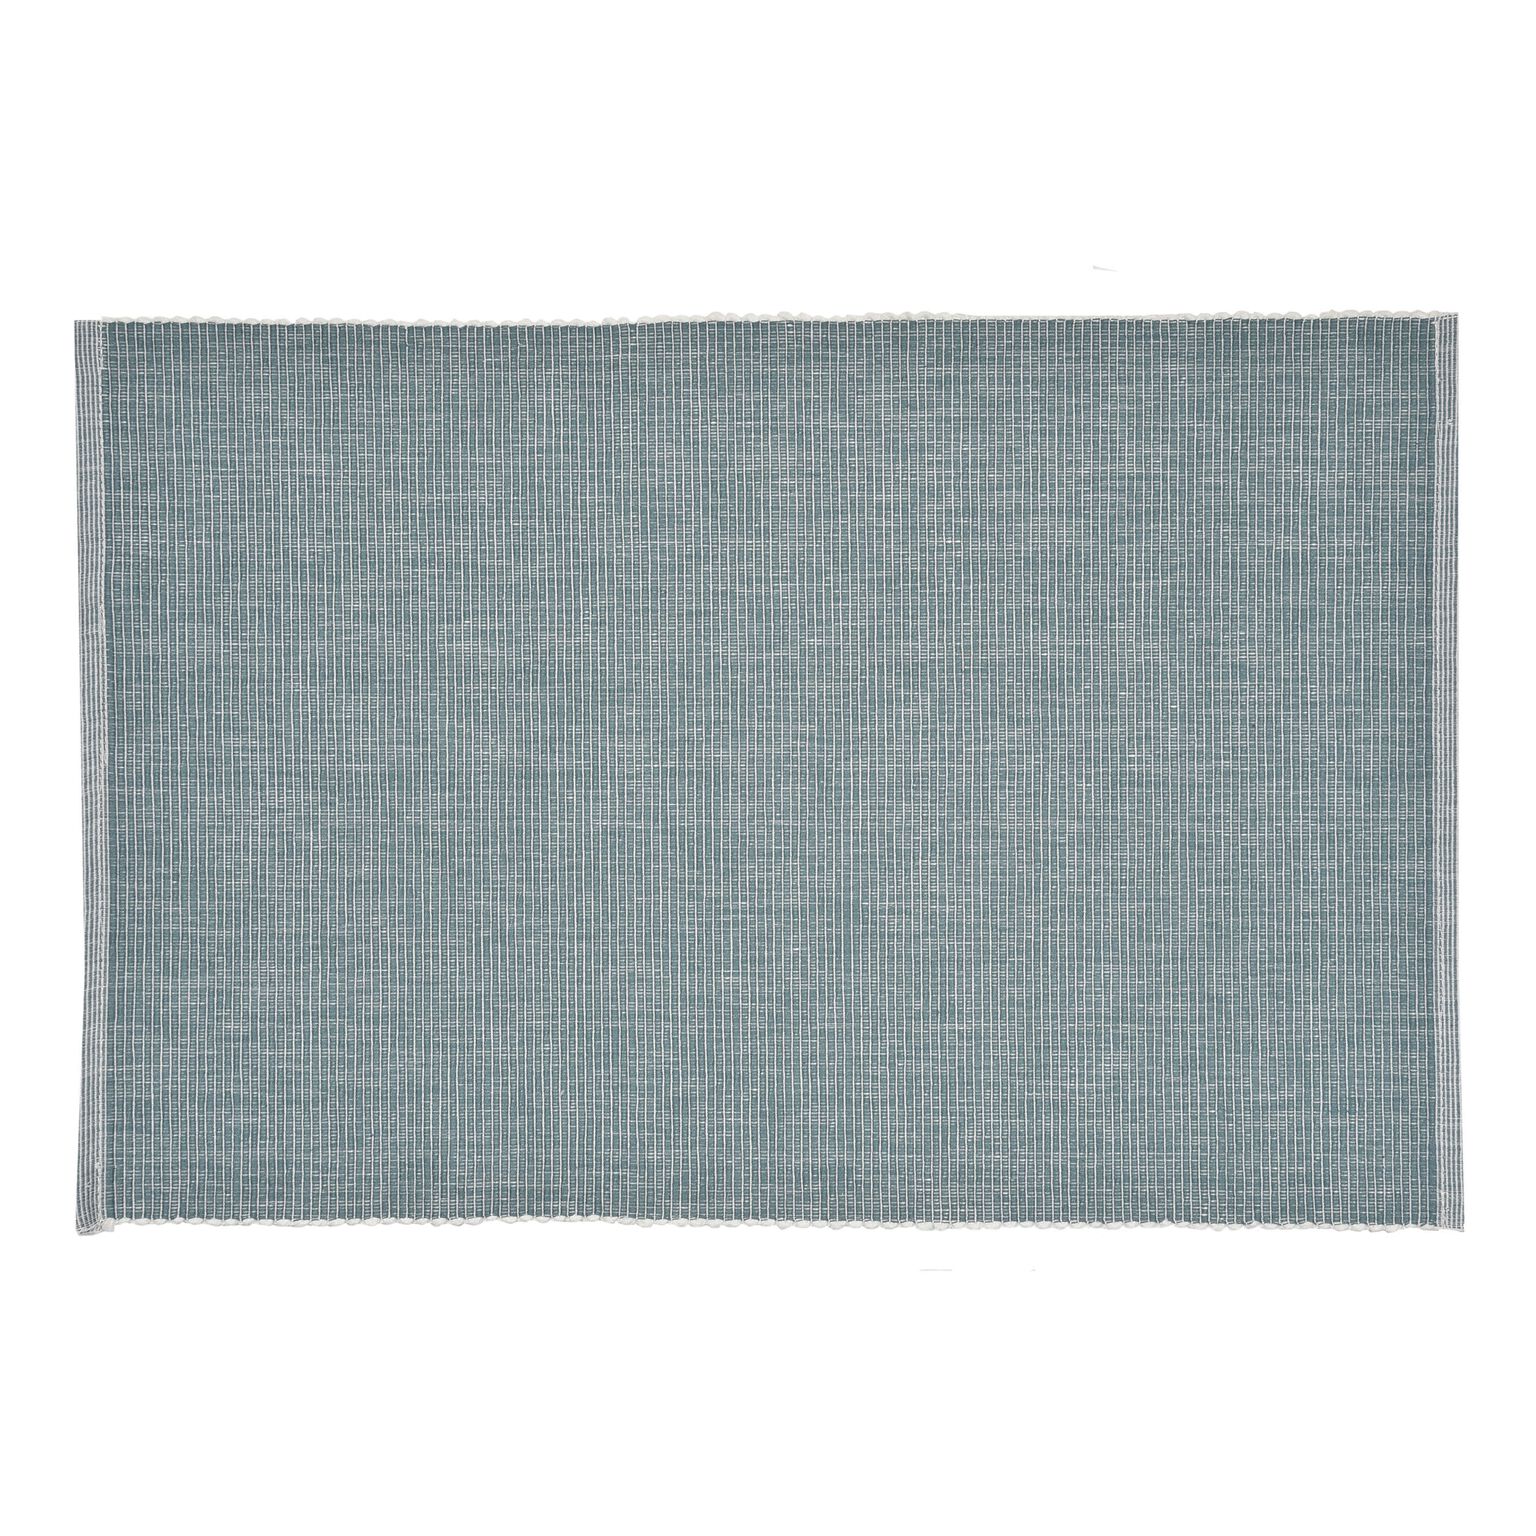 Distressed Teal Ribbed Placemats Set of 4 - World Market